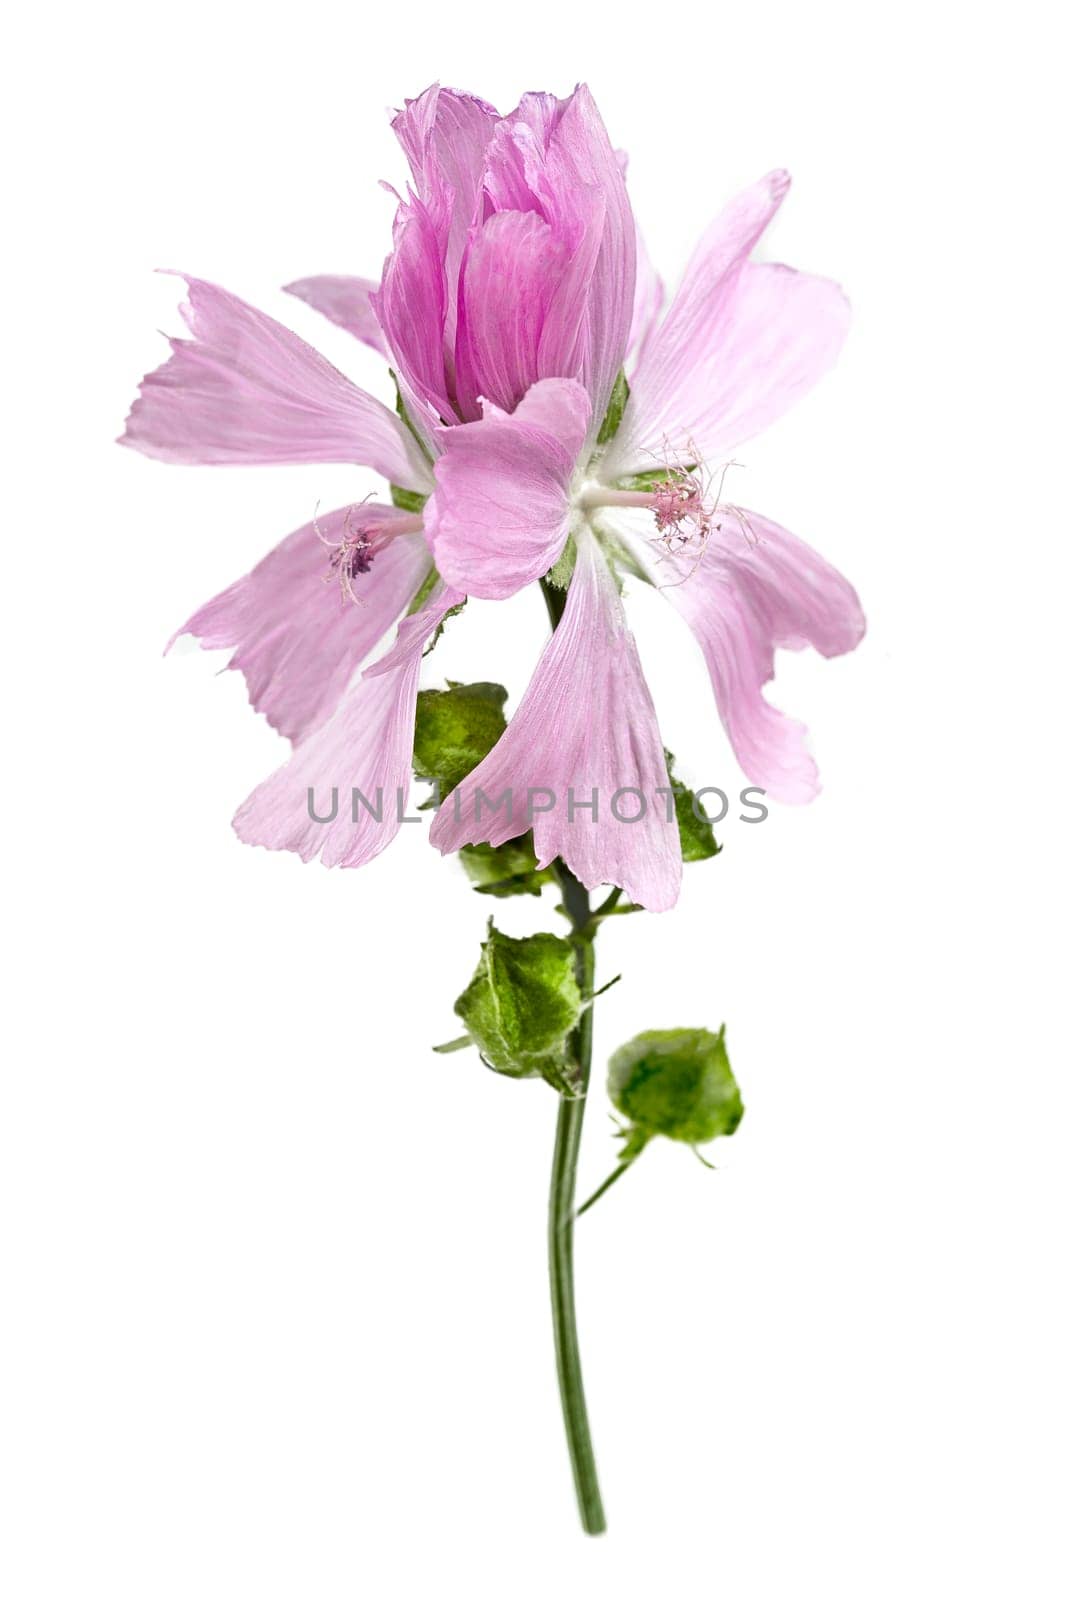 Violet Common Mallow flower Malva Sylvestris isolated on white background by JPC-PROD